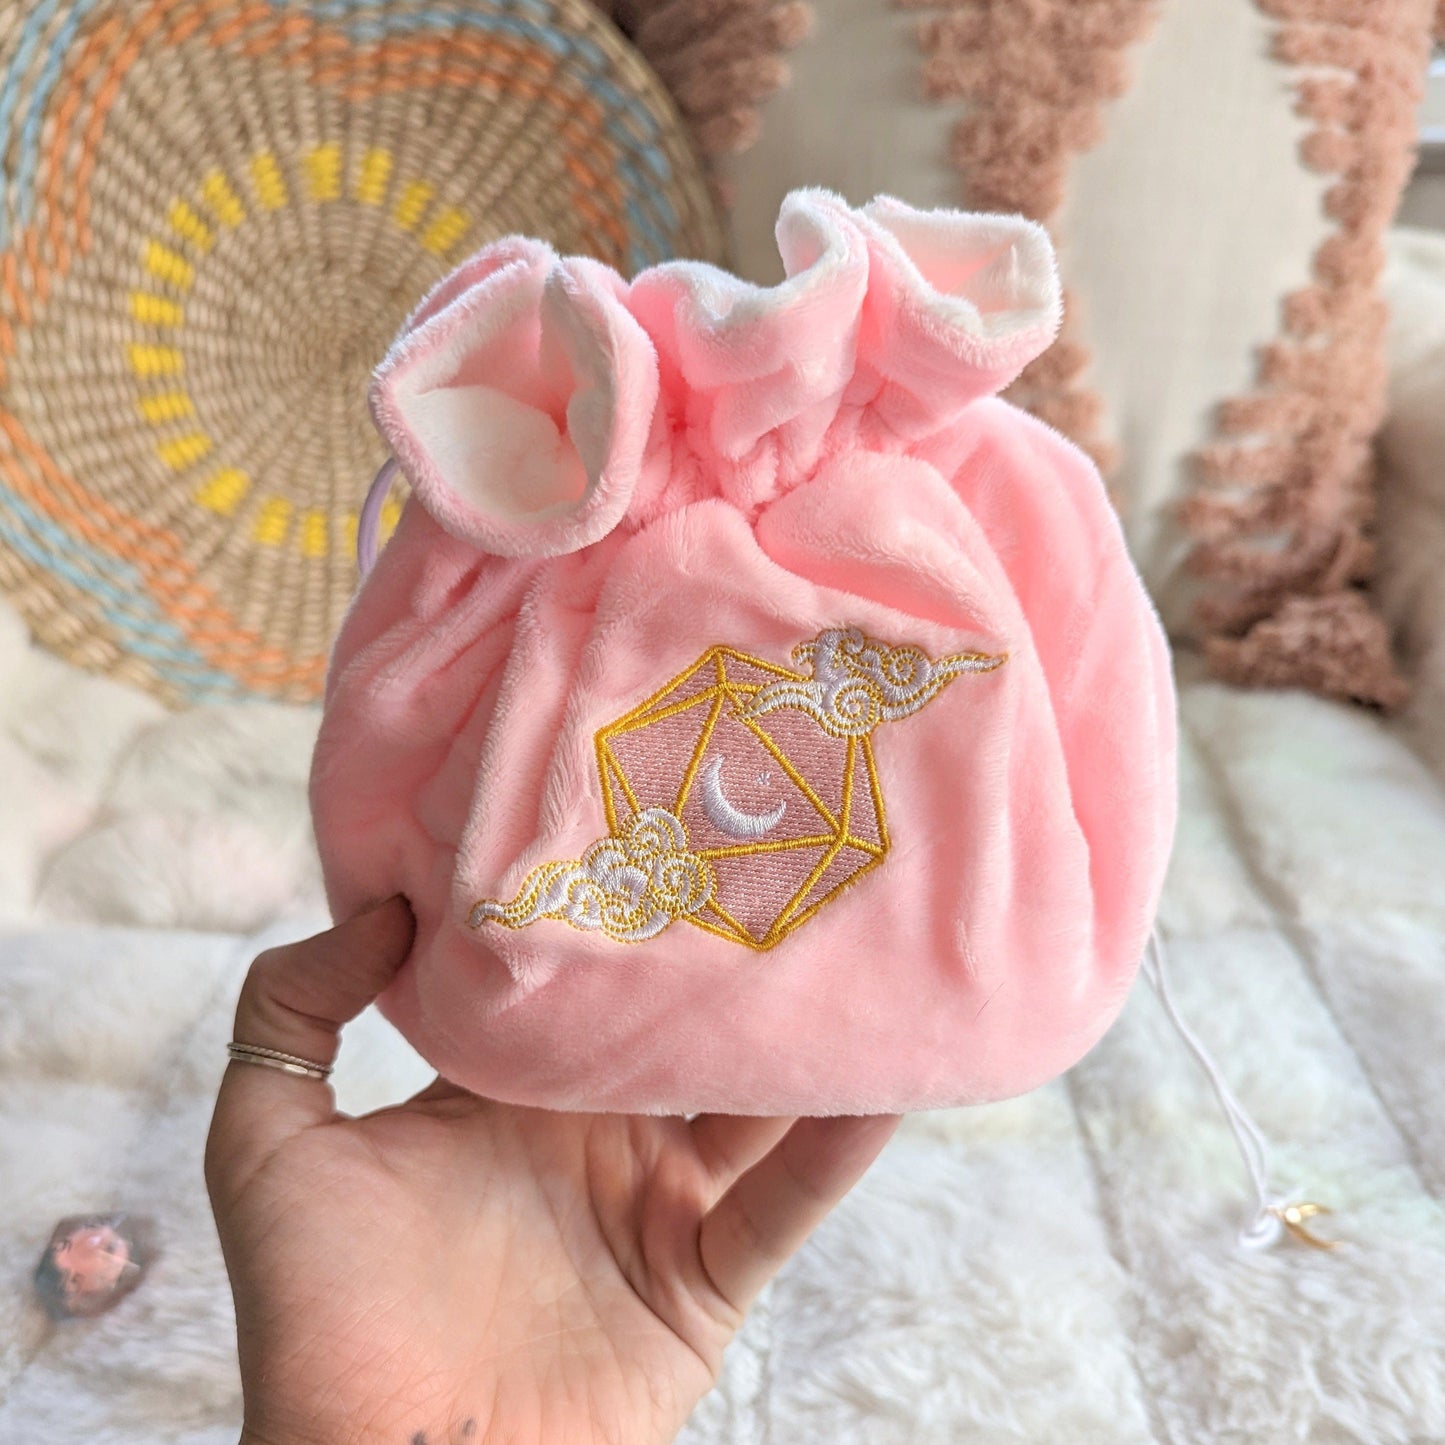 Dreamy dice bag. Multi pocket large dice bag in pink and white